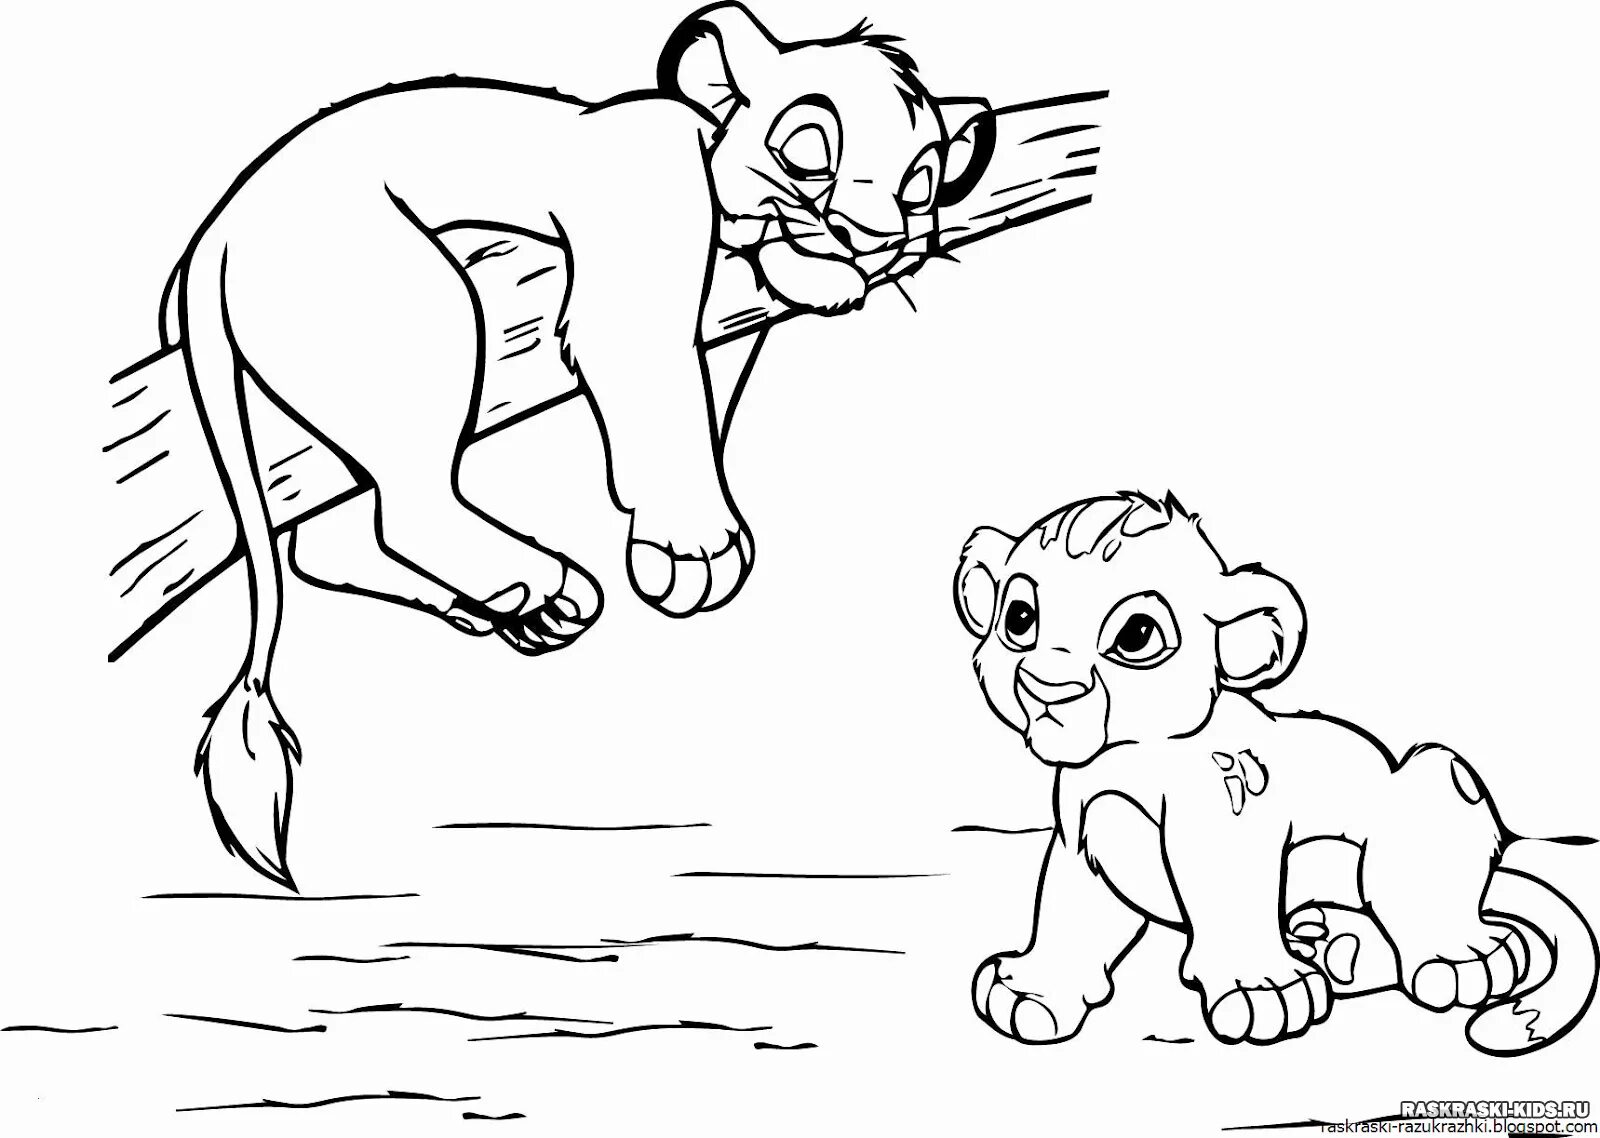 The lion king for kids #5